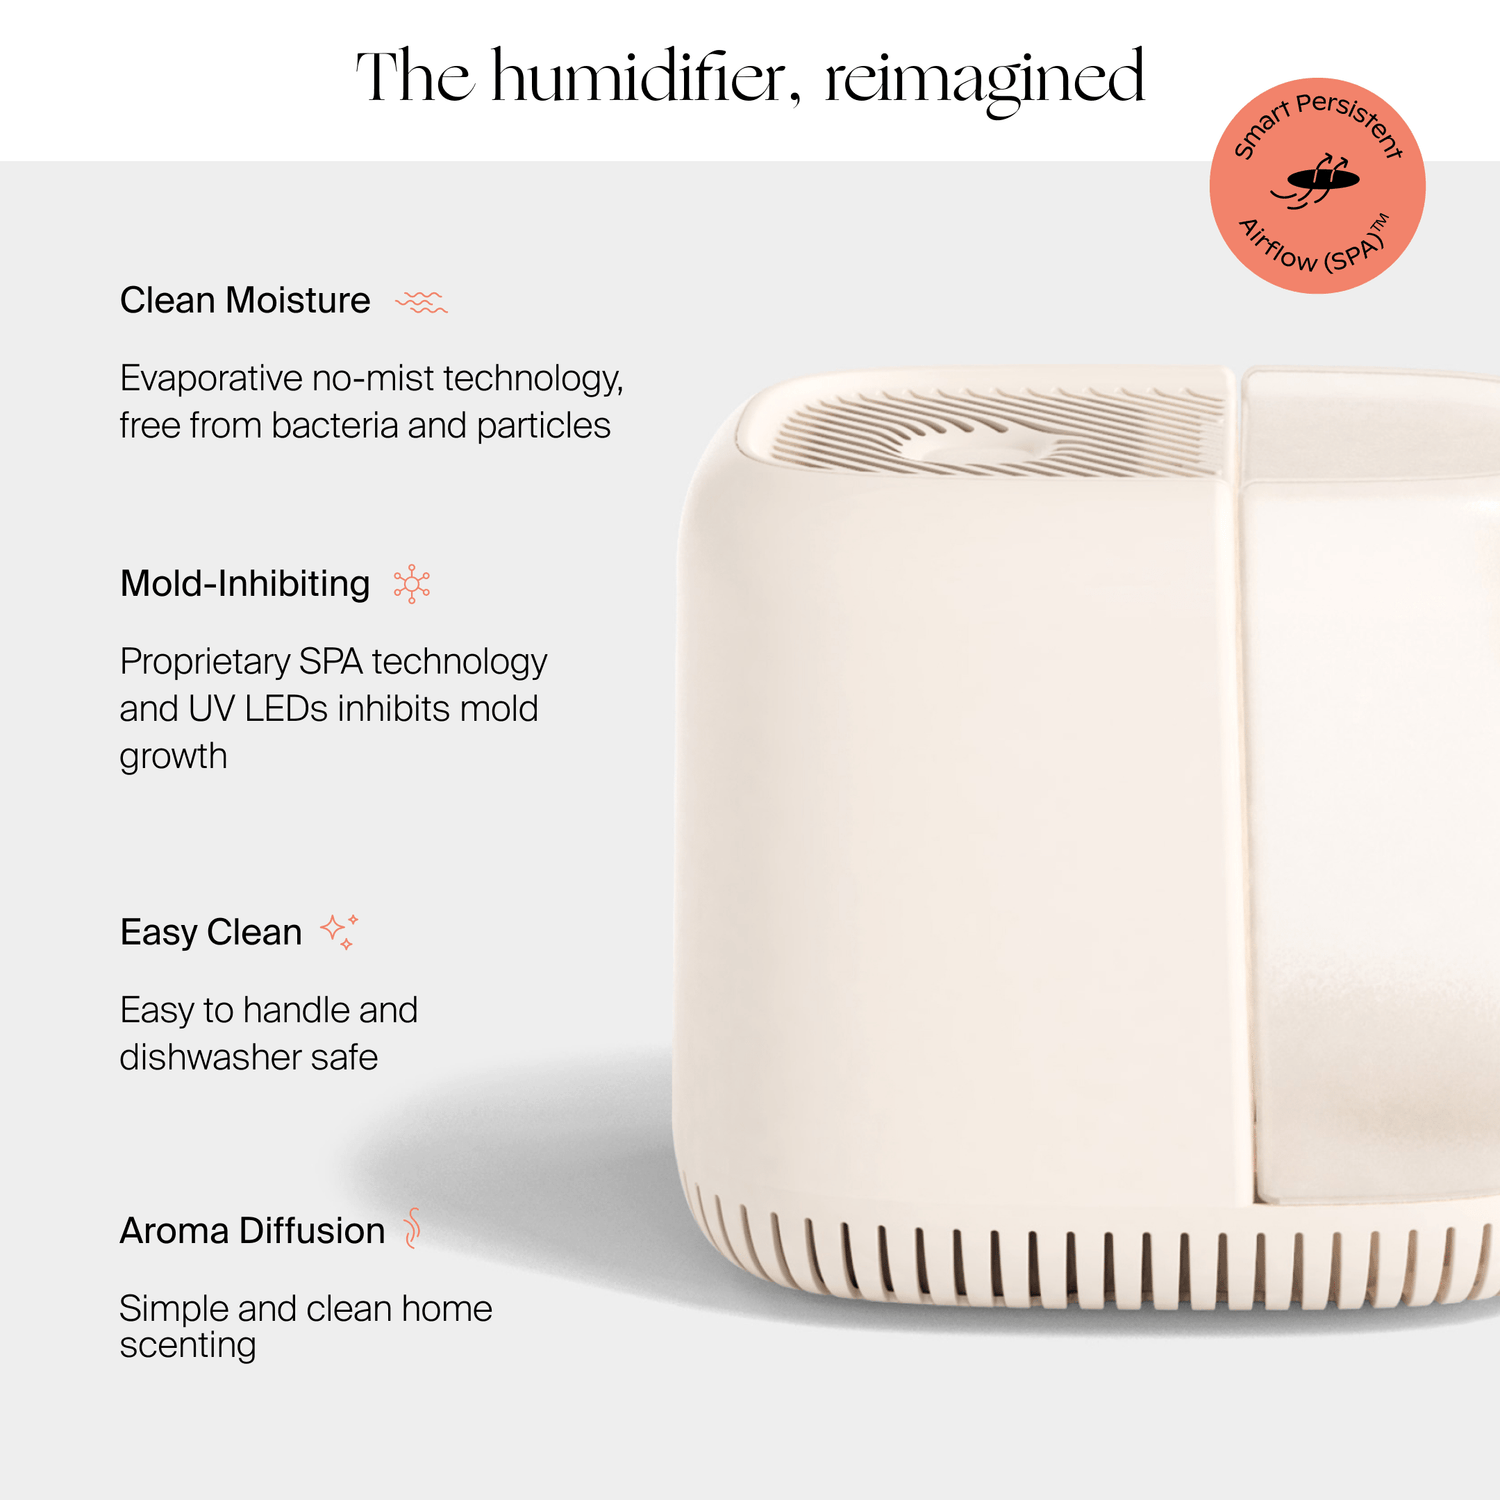 Nursery Humidifier | Lifestyle, the humidifier, reimagined